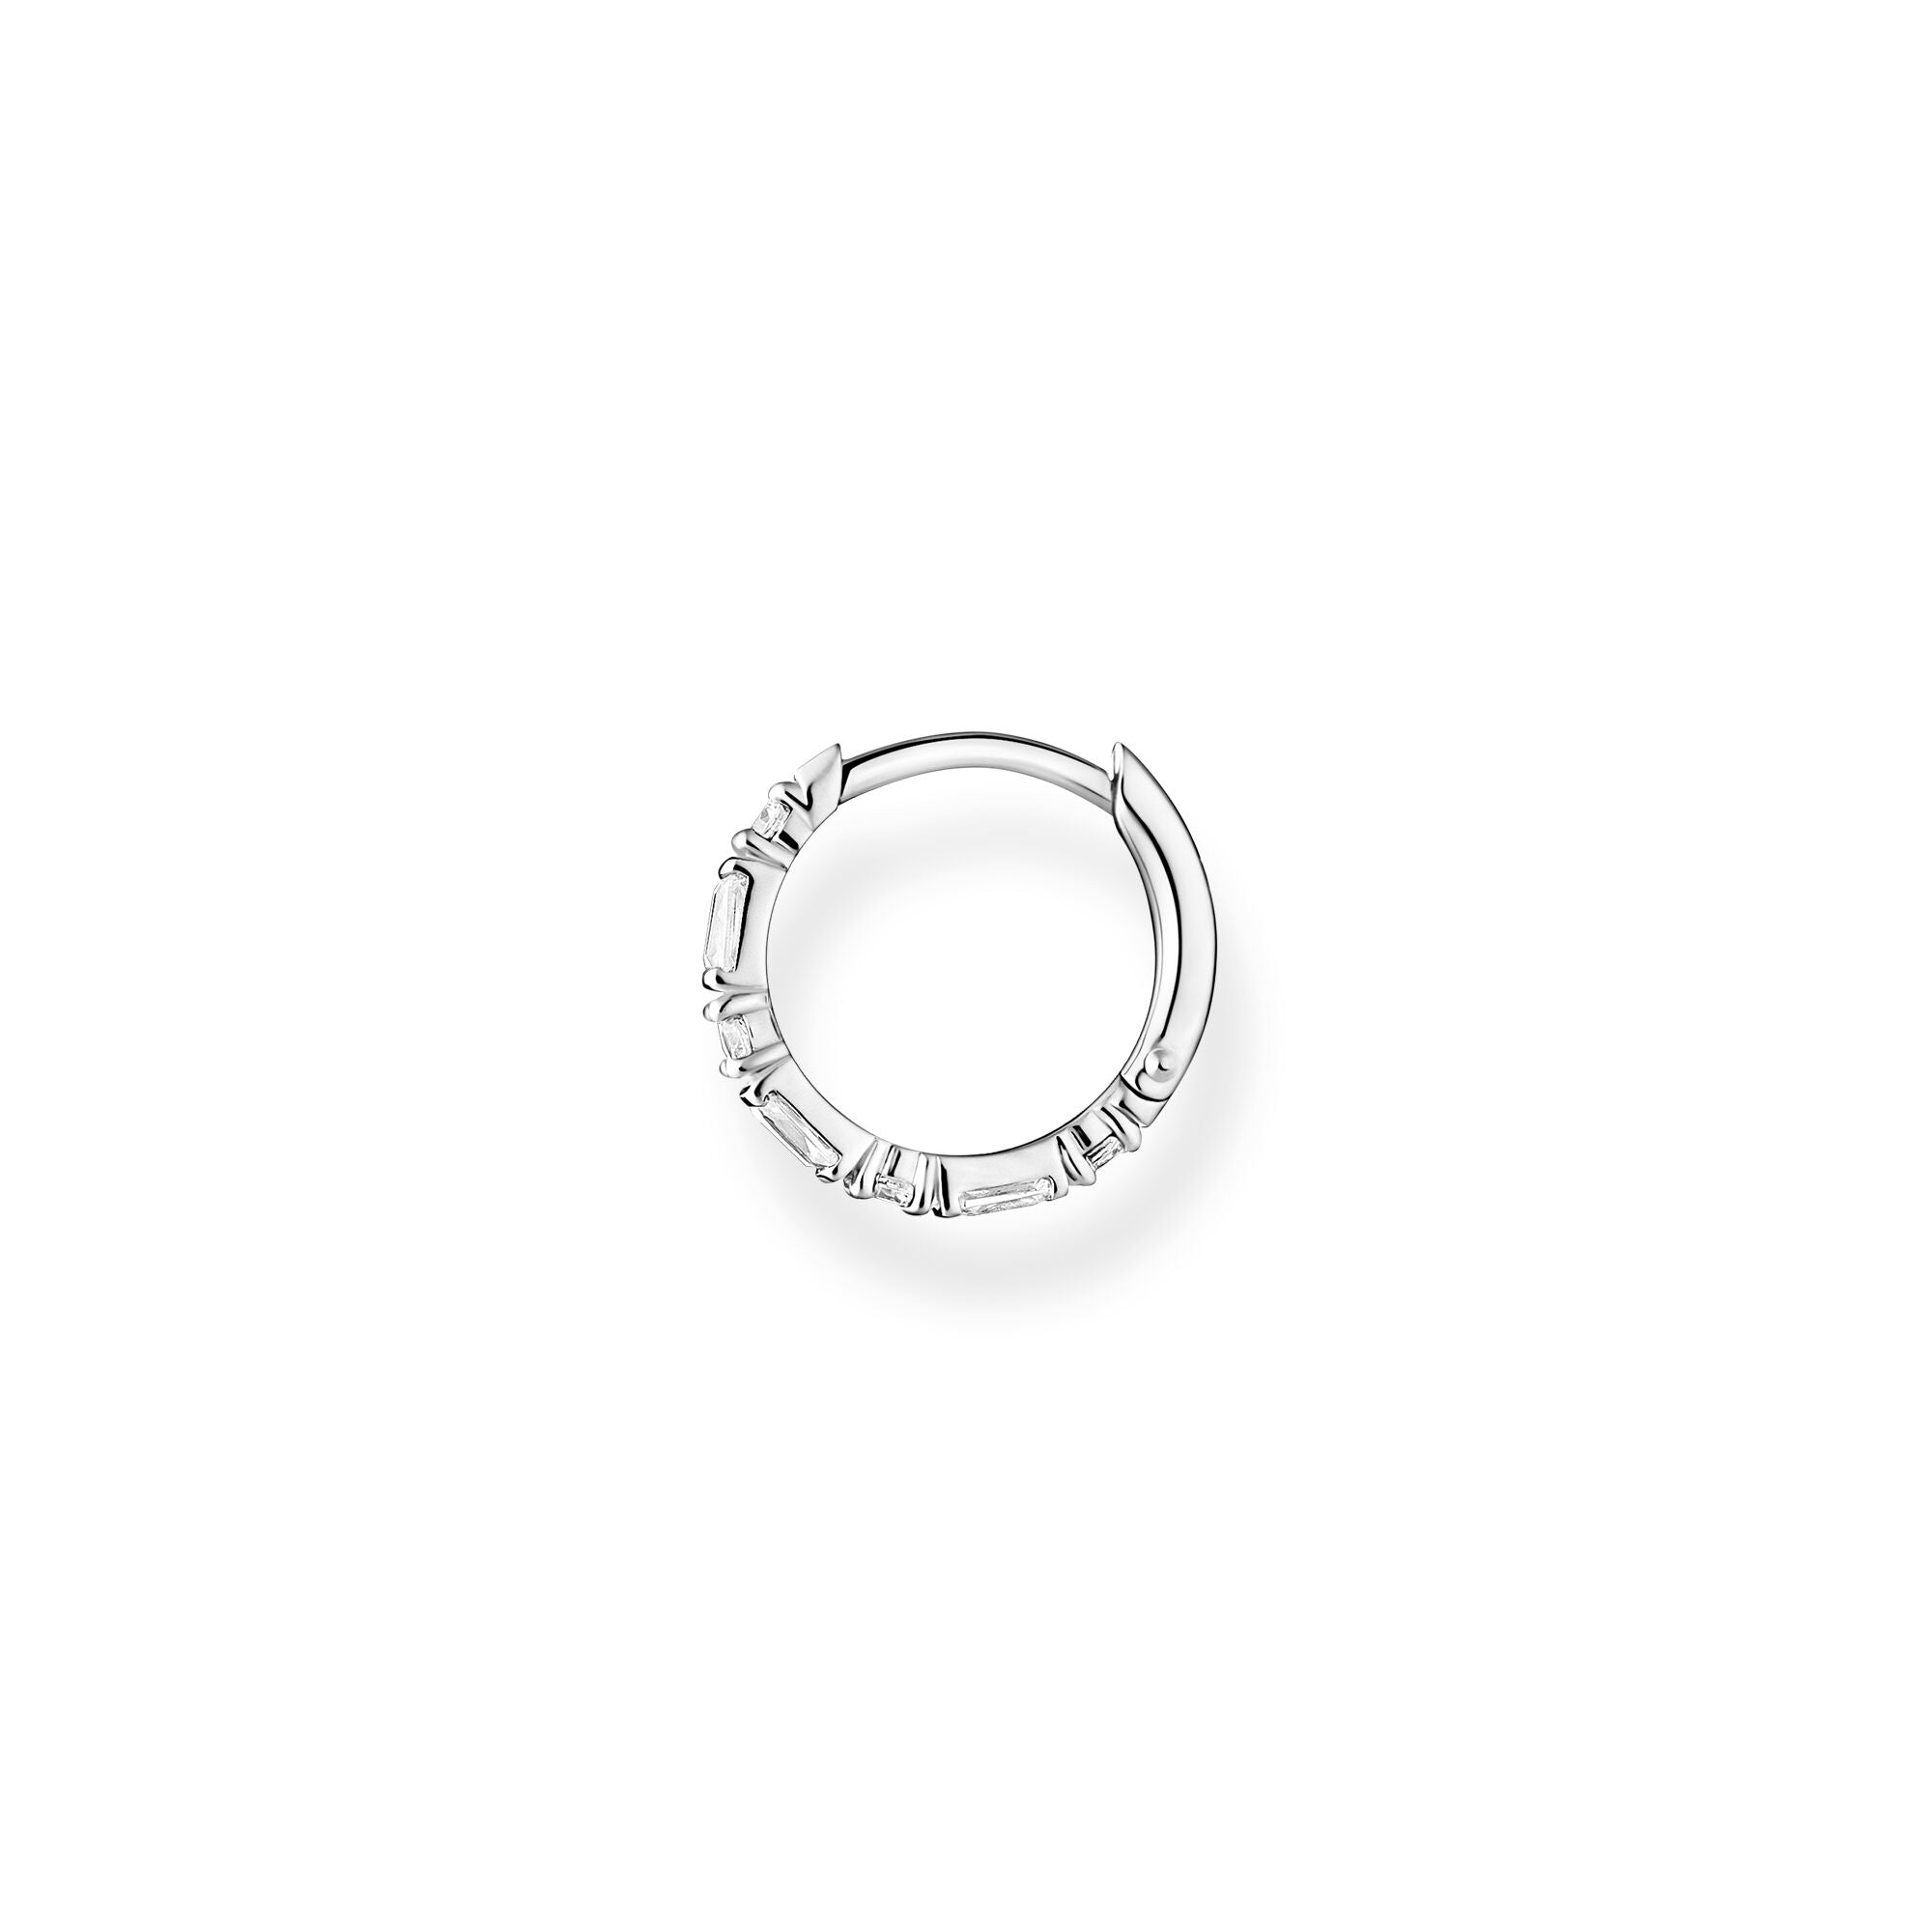 Single Hoop Earring Baguette And Round Cut White Stones - Silver